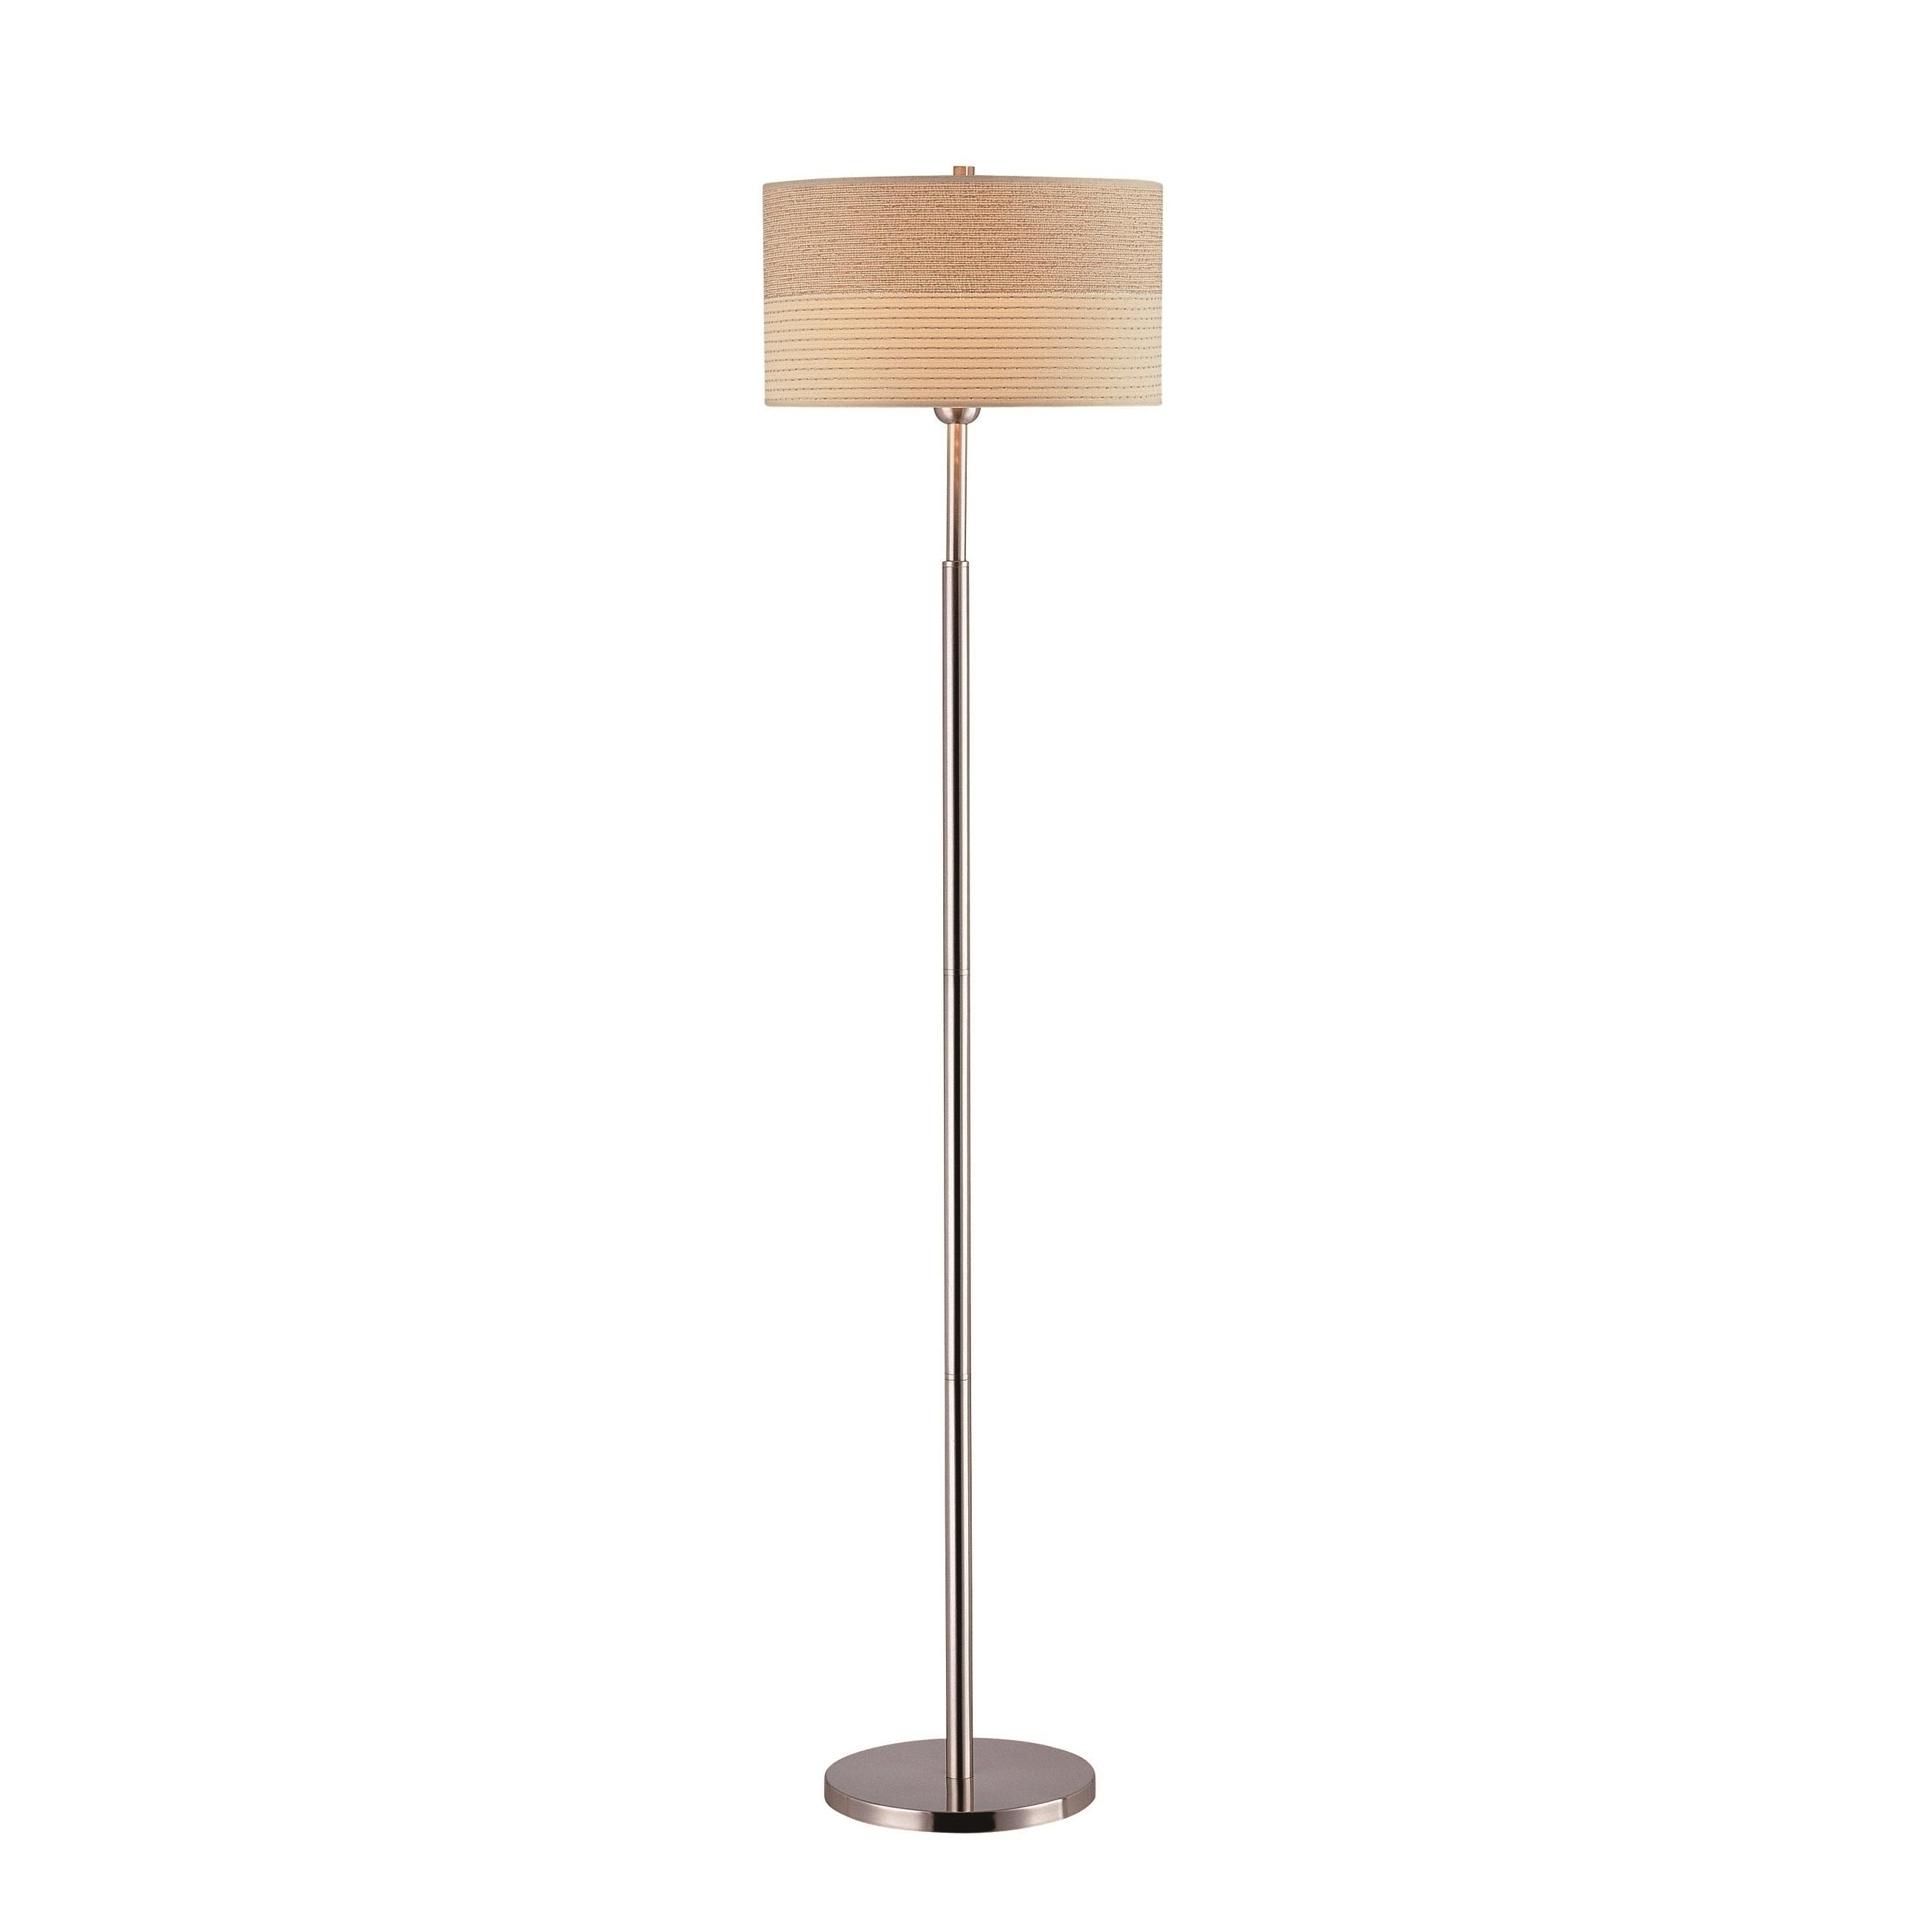 Lite Source Relaxar Fluorescent Floor Lamp Polished Steel pertaining to proportions 2628 X 2628